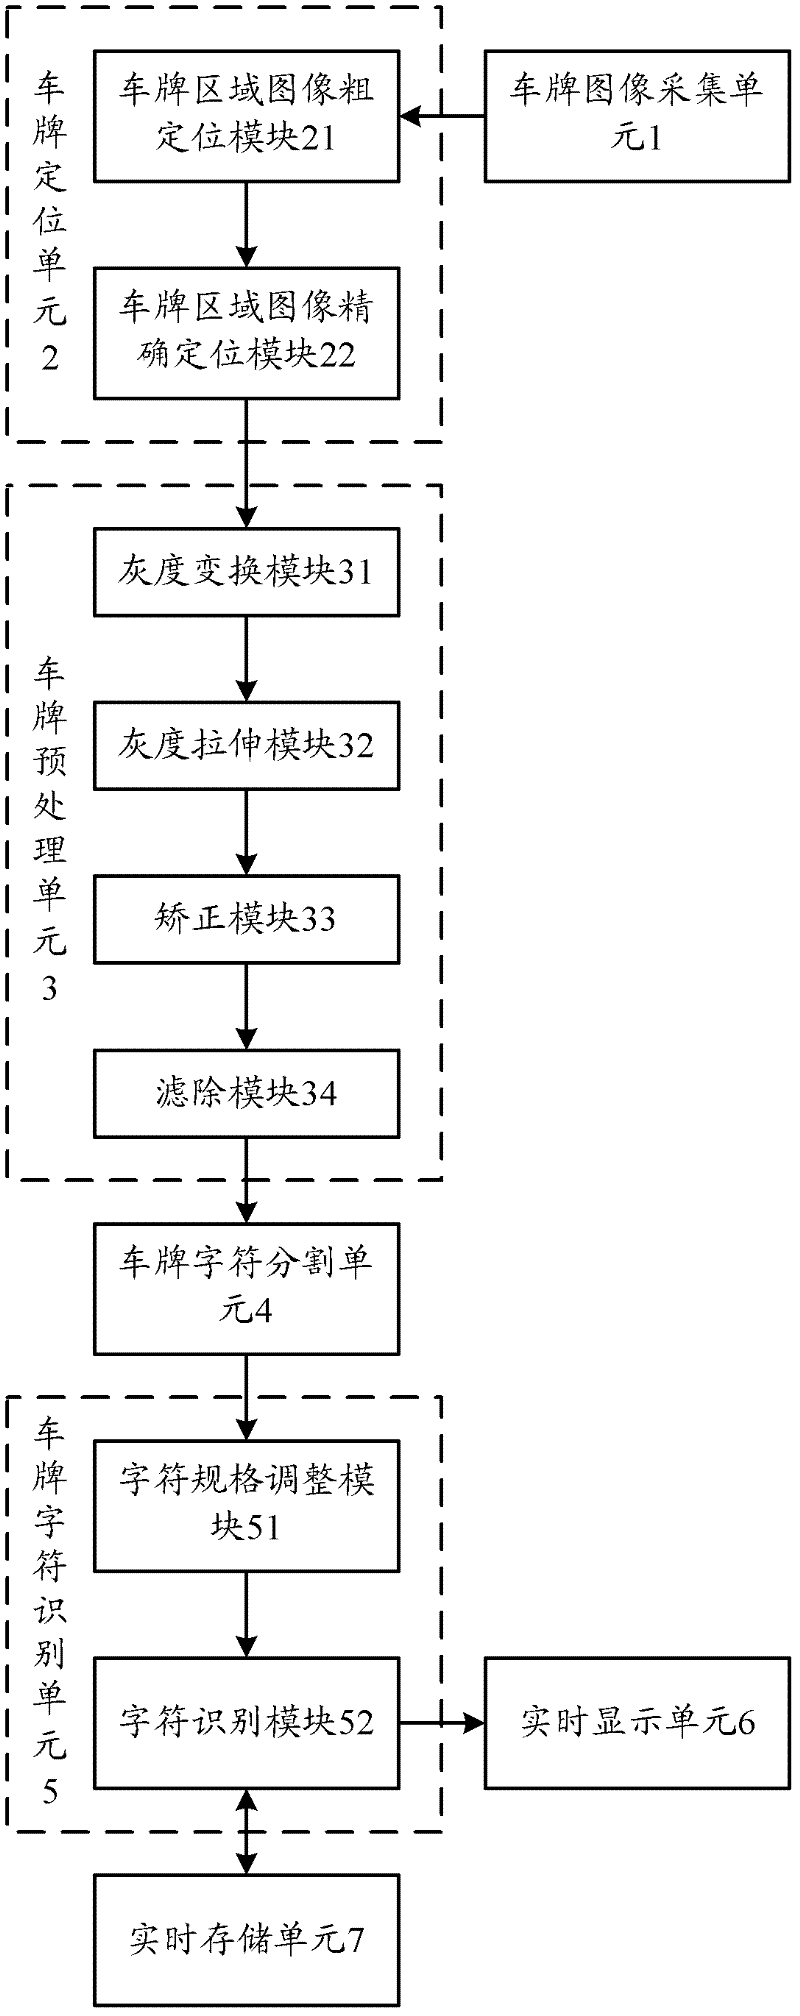 Method and system for identifying automobile license plates automatically based on image analysis